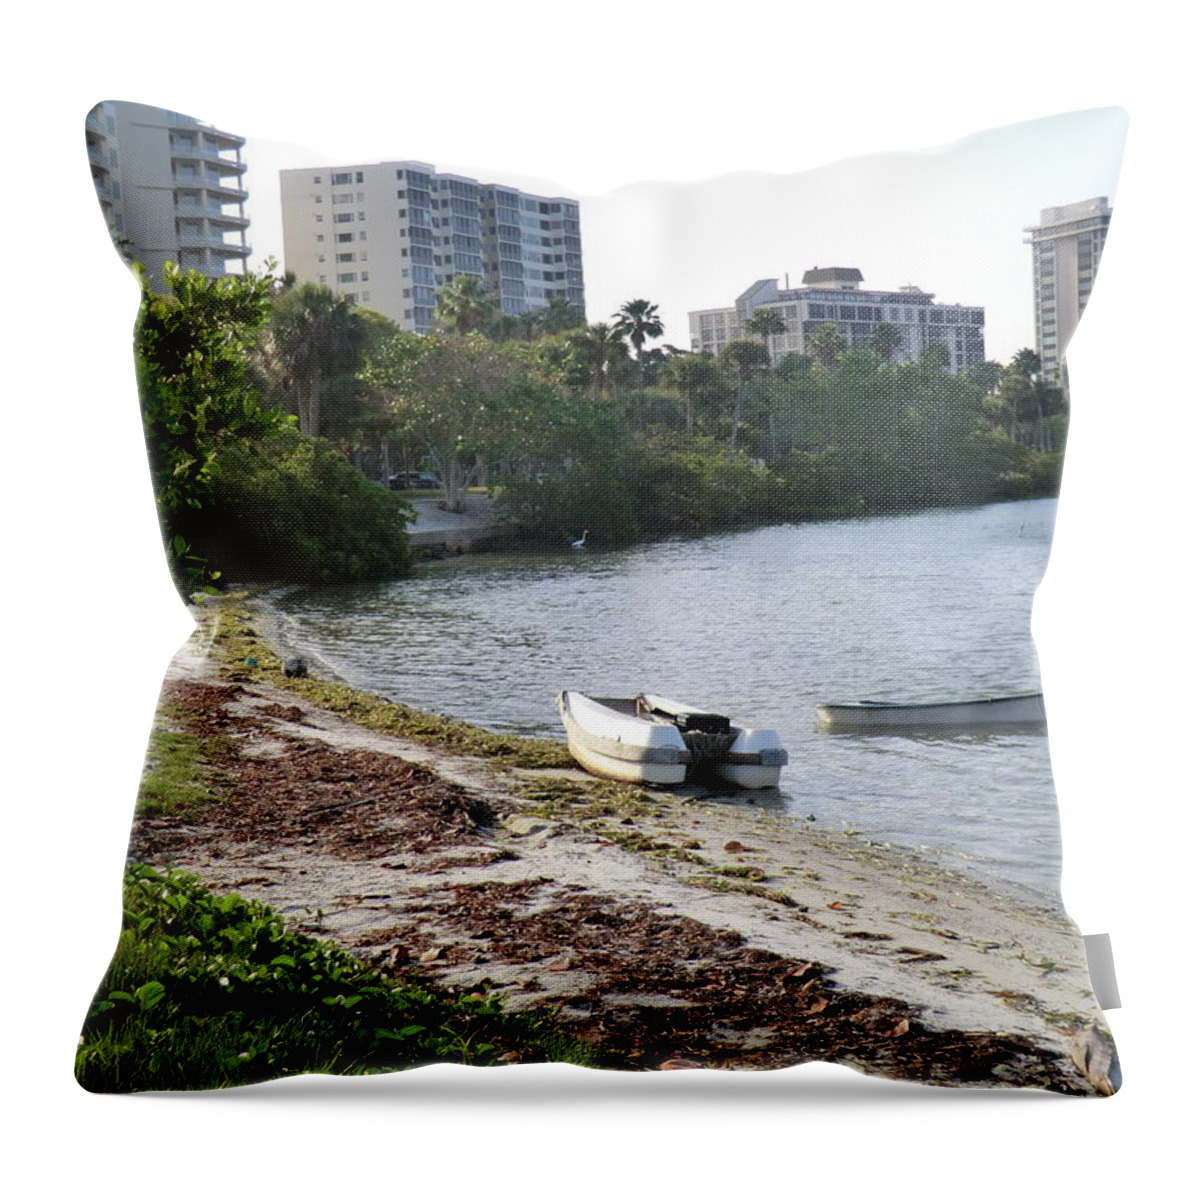 Sarasota Florida Sunshine States America U.s.a Water Beach Tropical Boat Waterfront Sea Water Beautiful Landscape Photos Photo Us Trees View Building Buildings Throw Pillow featuring the digital art Sarasota, Florida #1 by Jeanette Rode Dybdahl